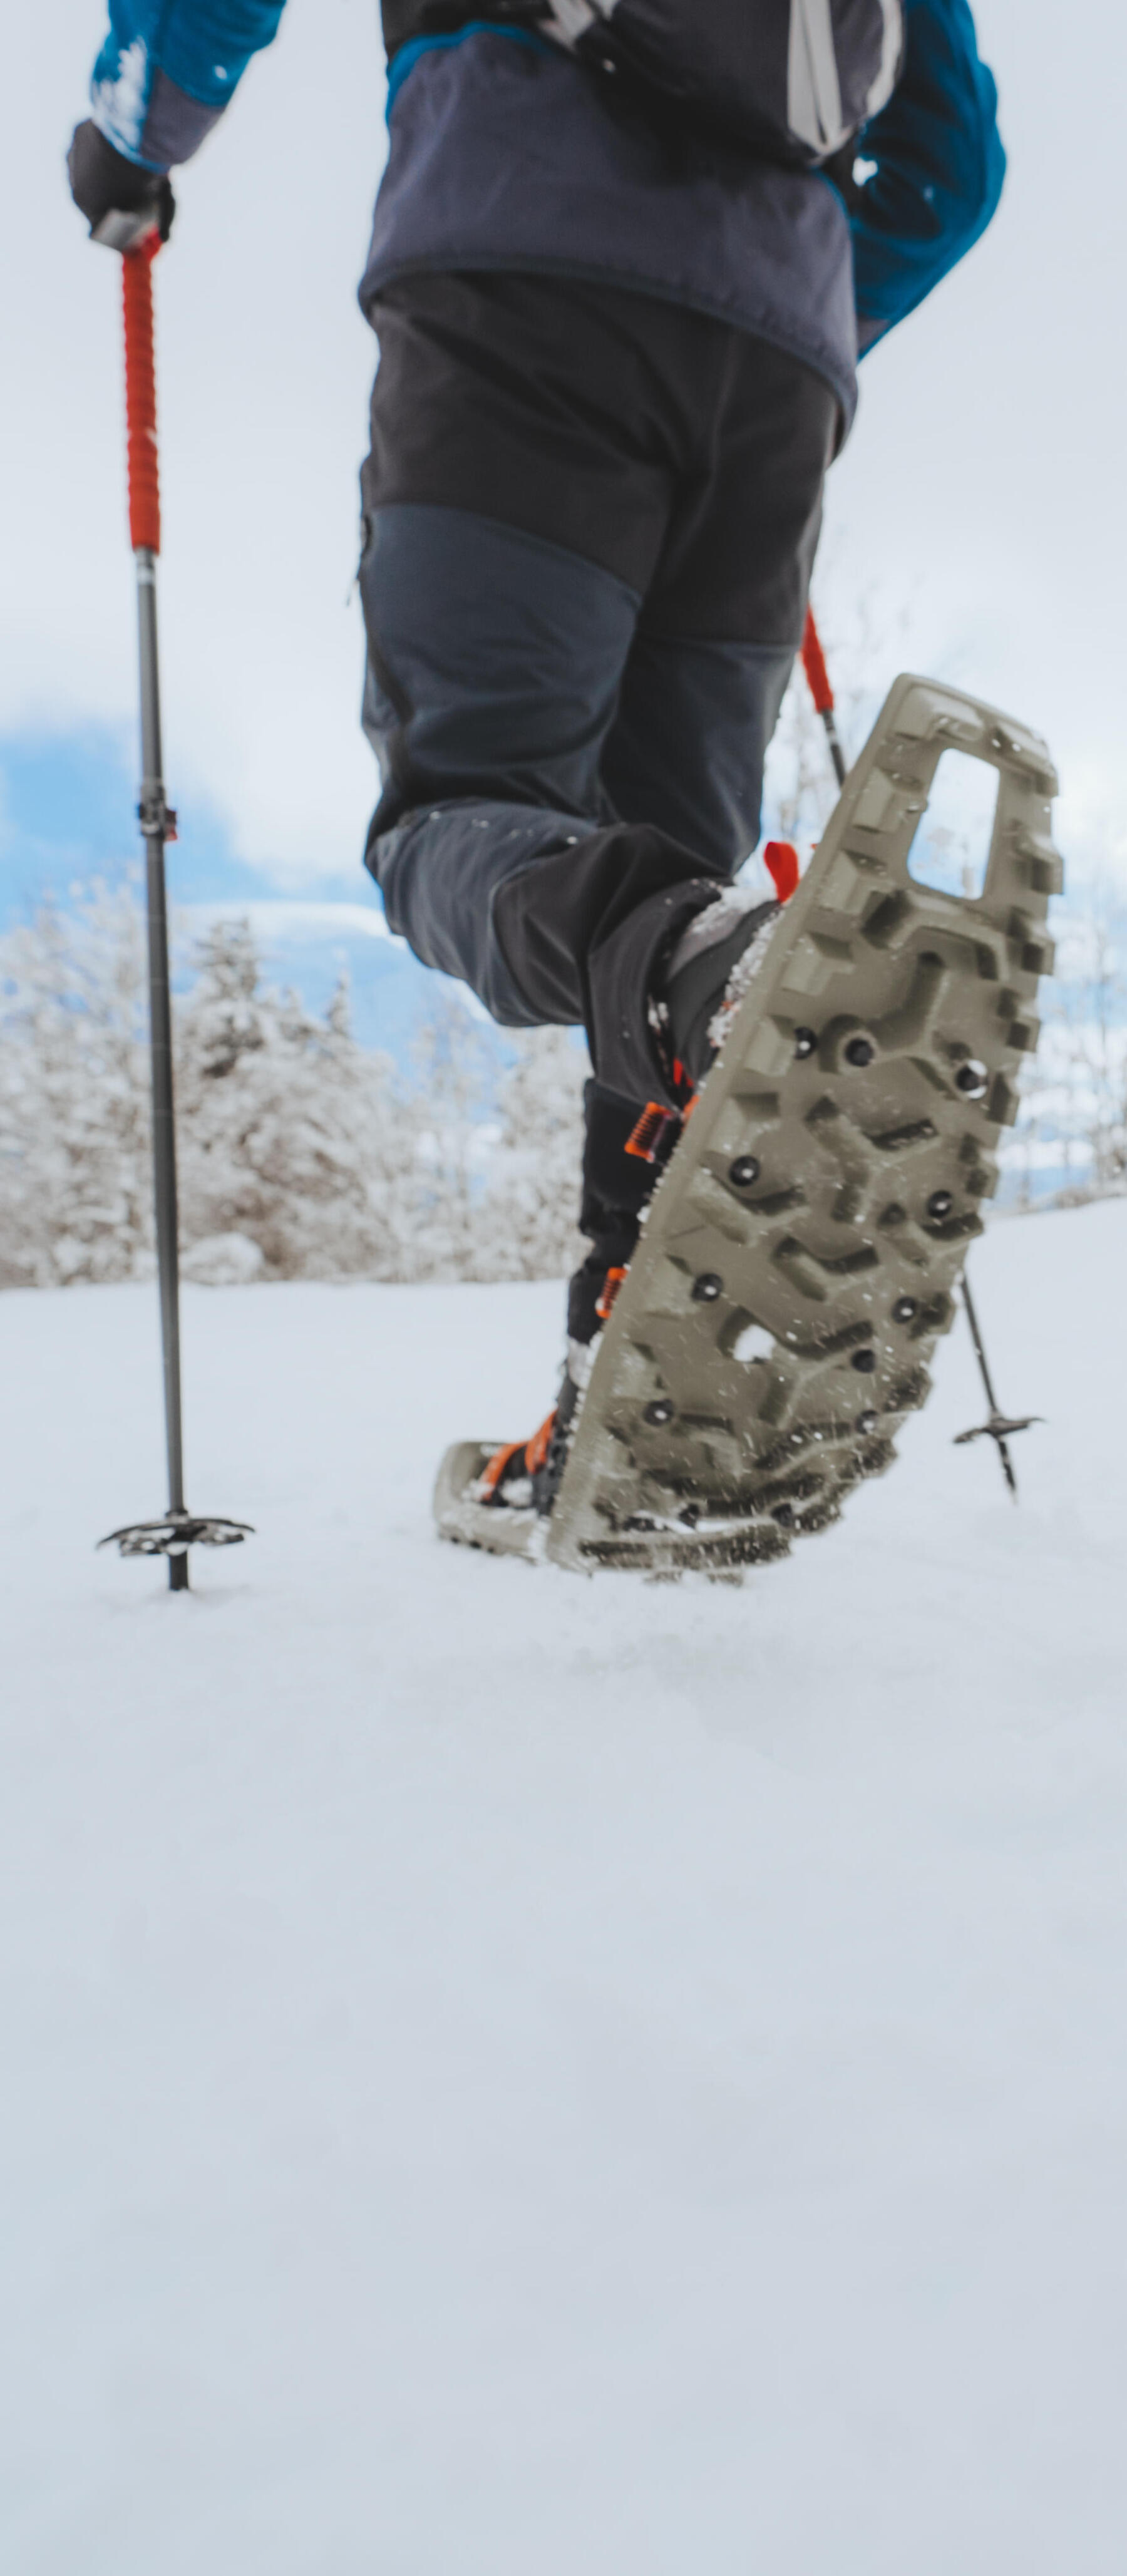 How to choose your snowshoes